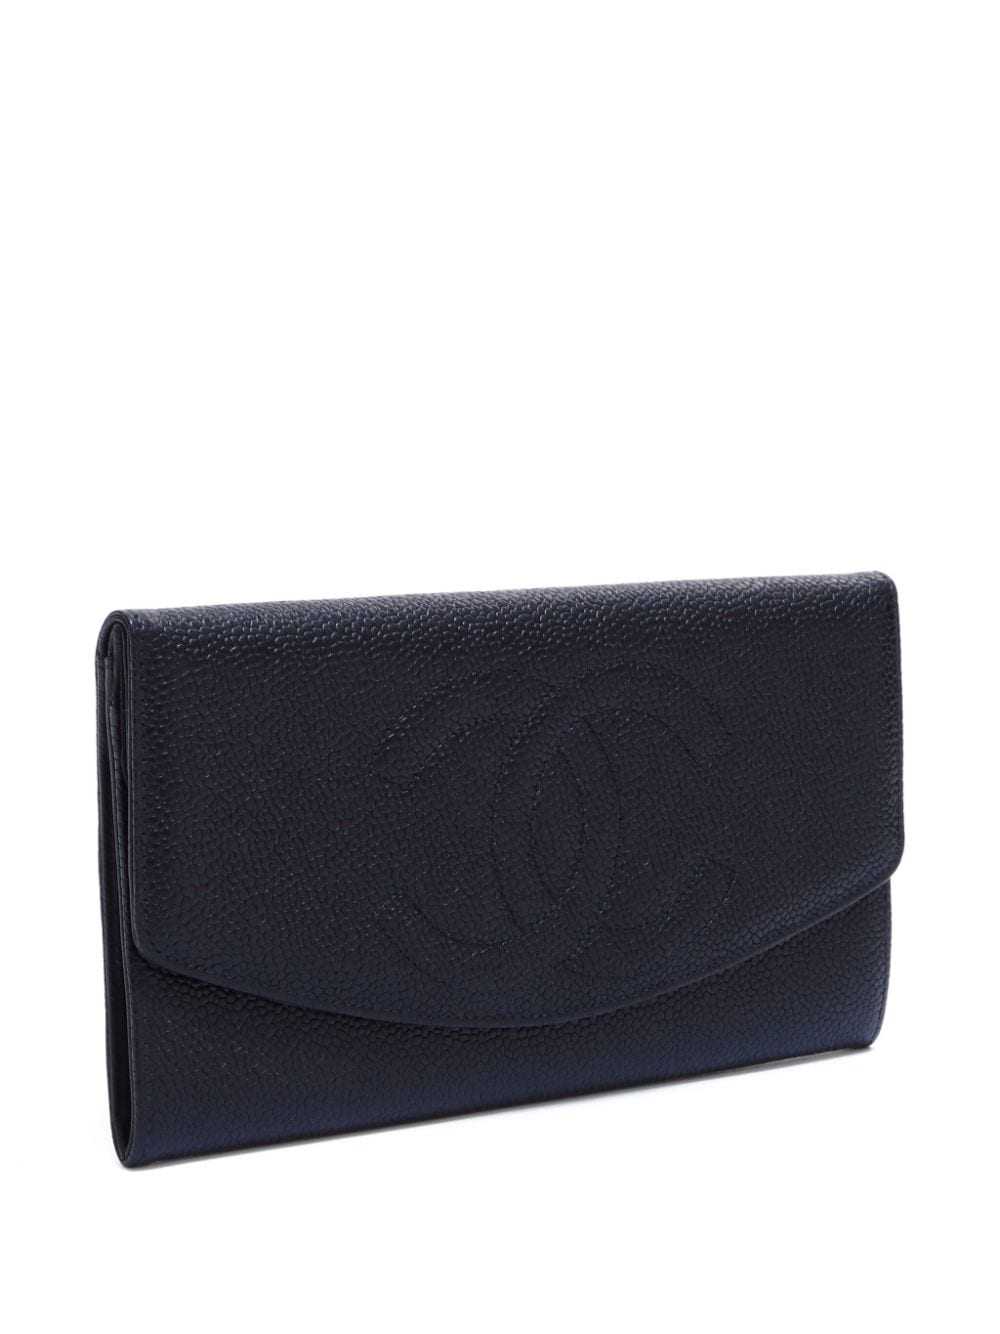 CHANEL Pre-Owned 1994-1999 CC debossed flap long … - image 3